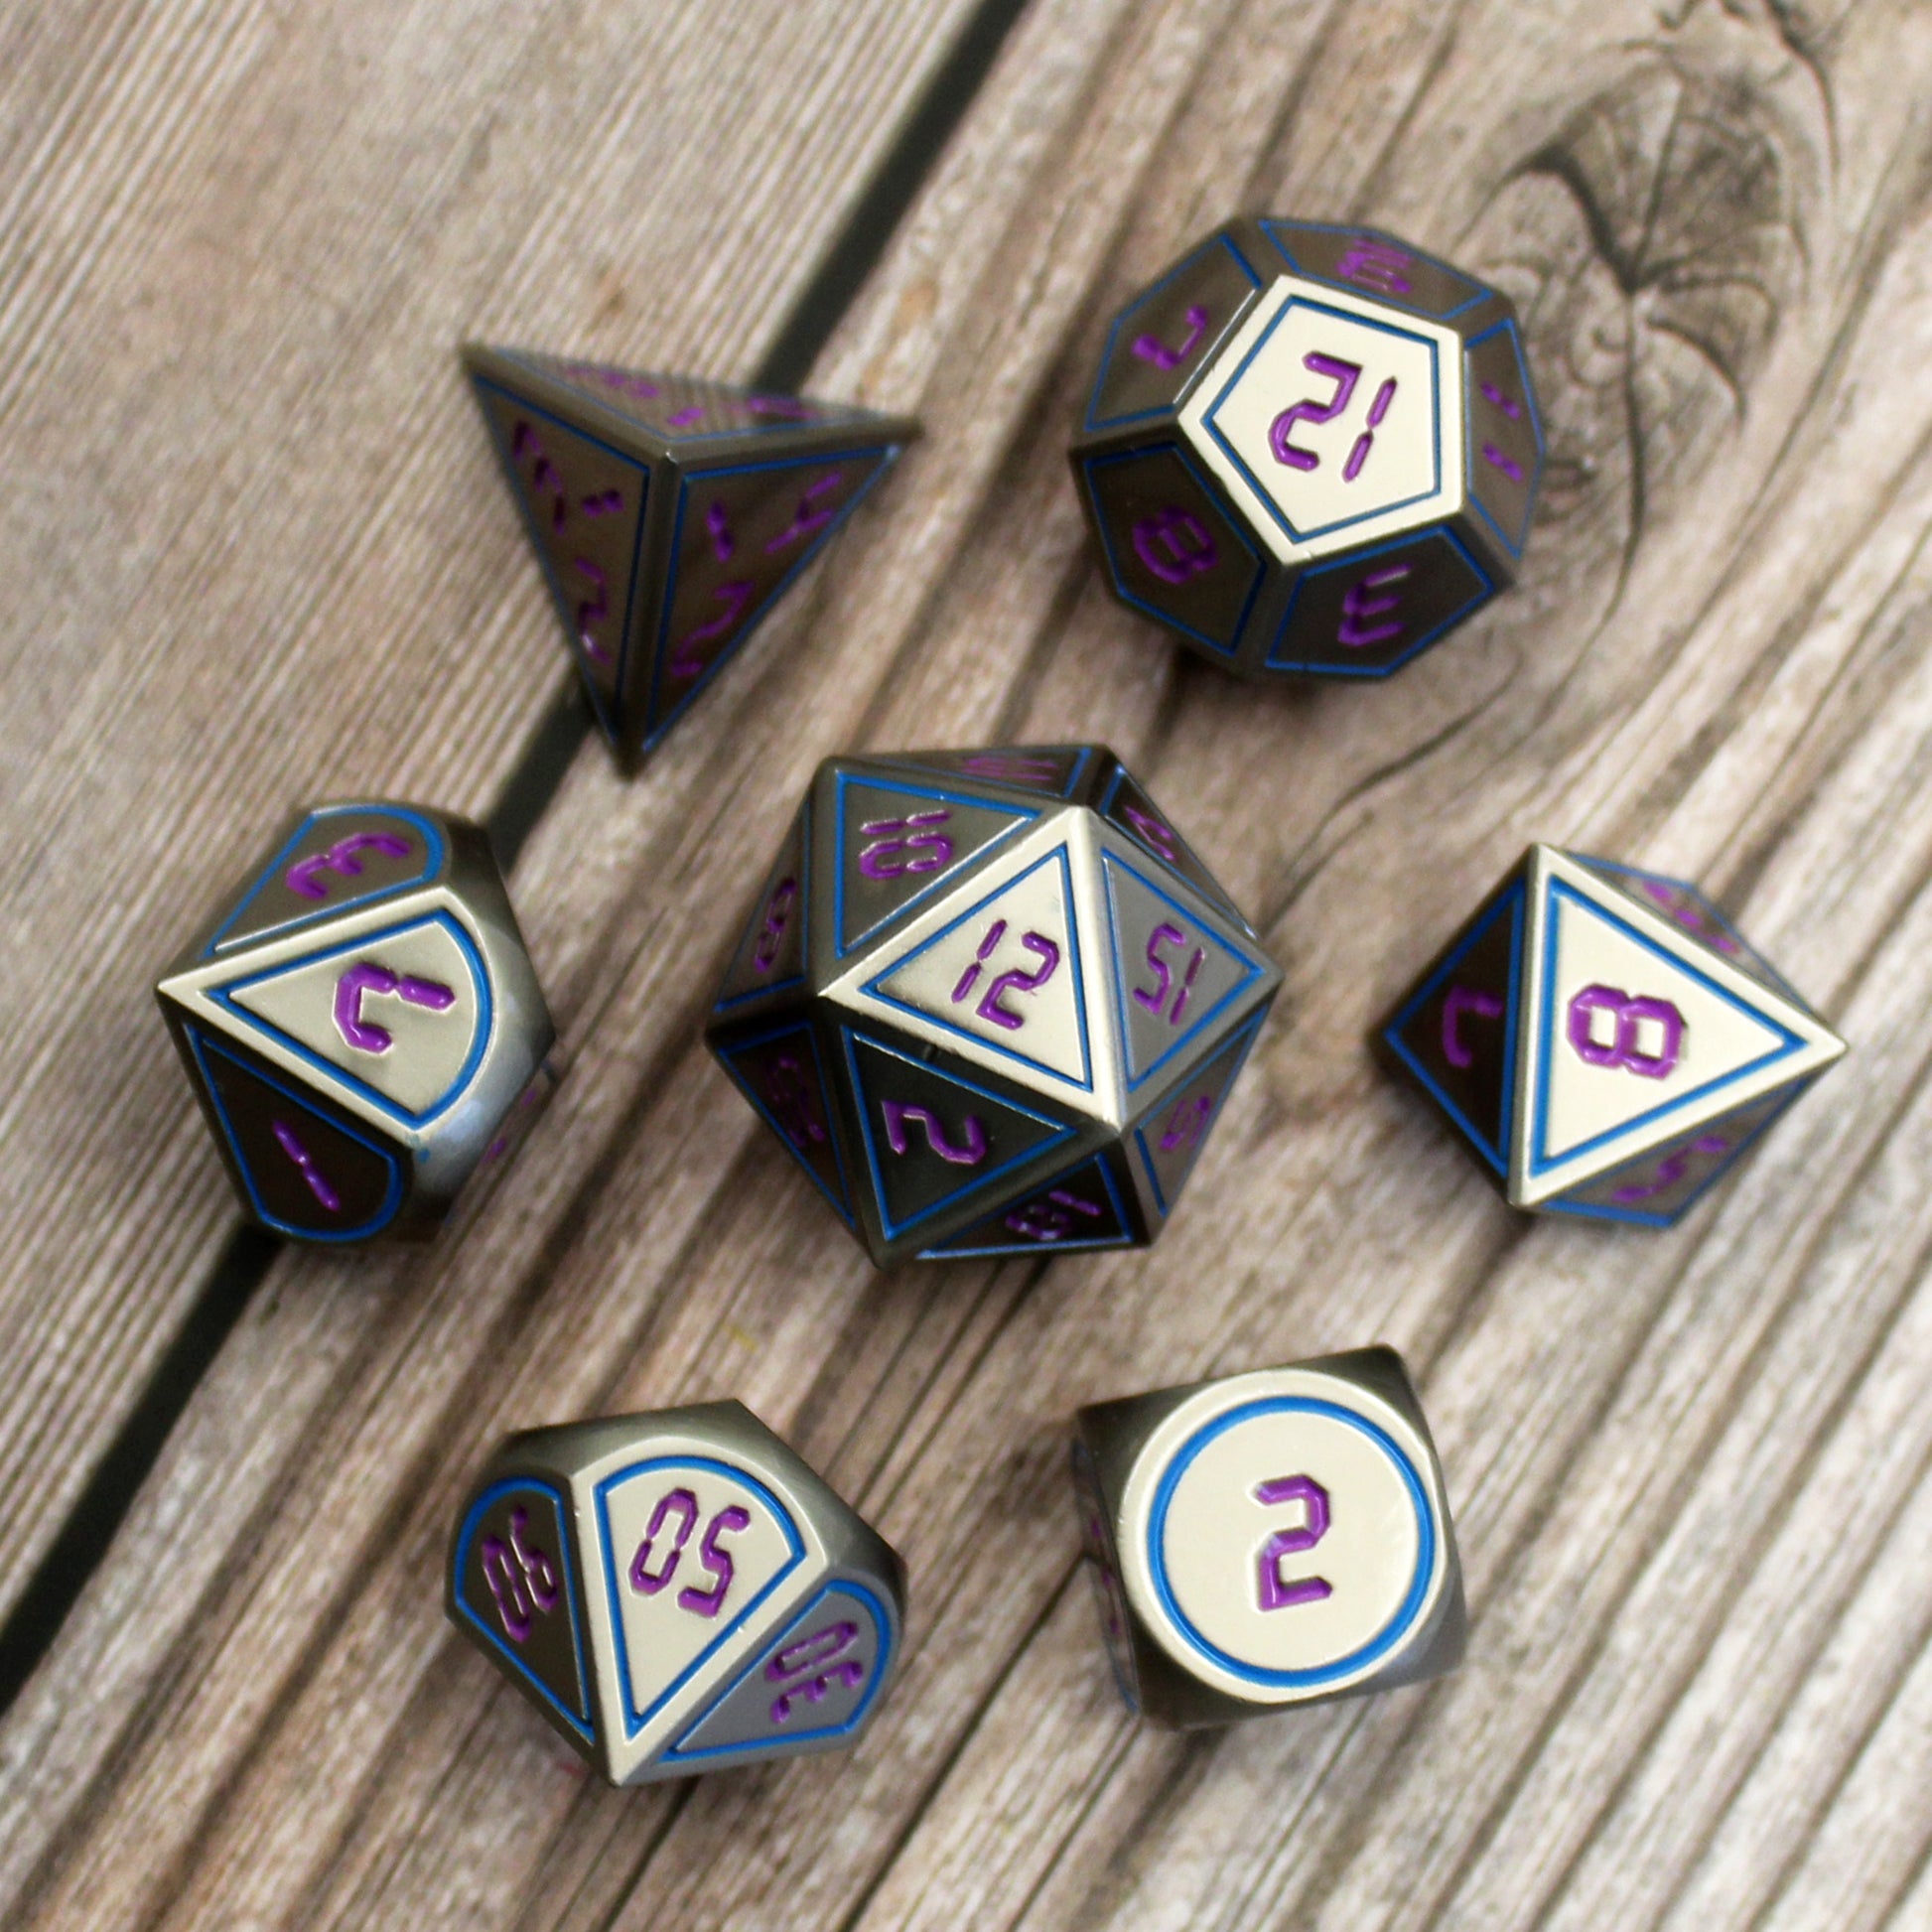 metal dungeons and dragons or starfinder dice on wooden table.